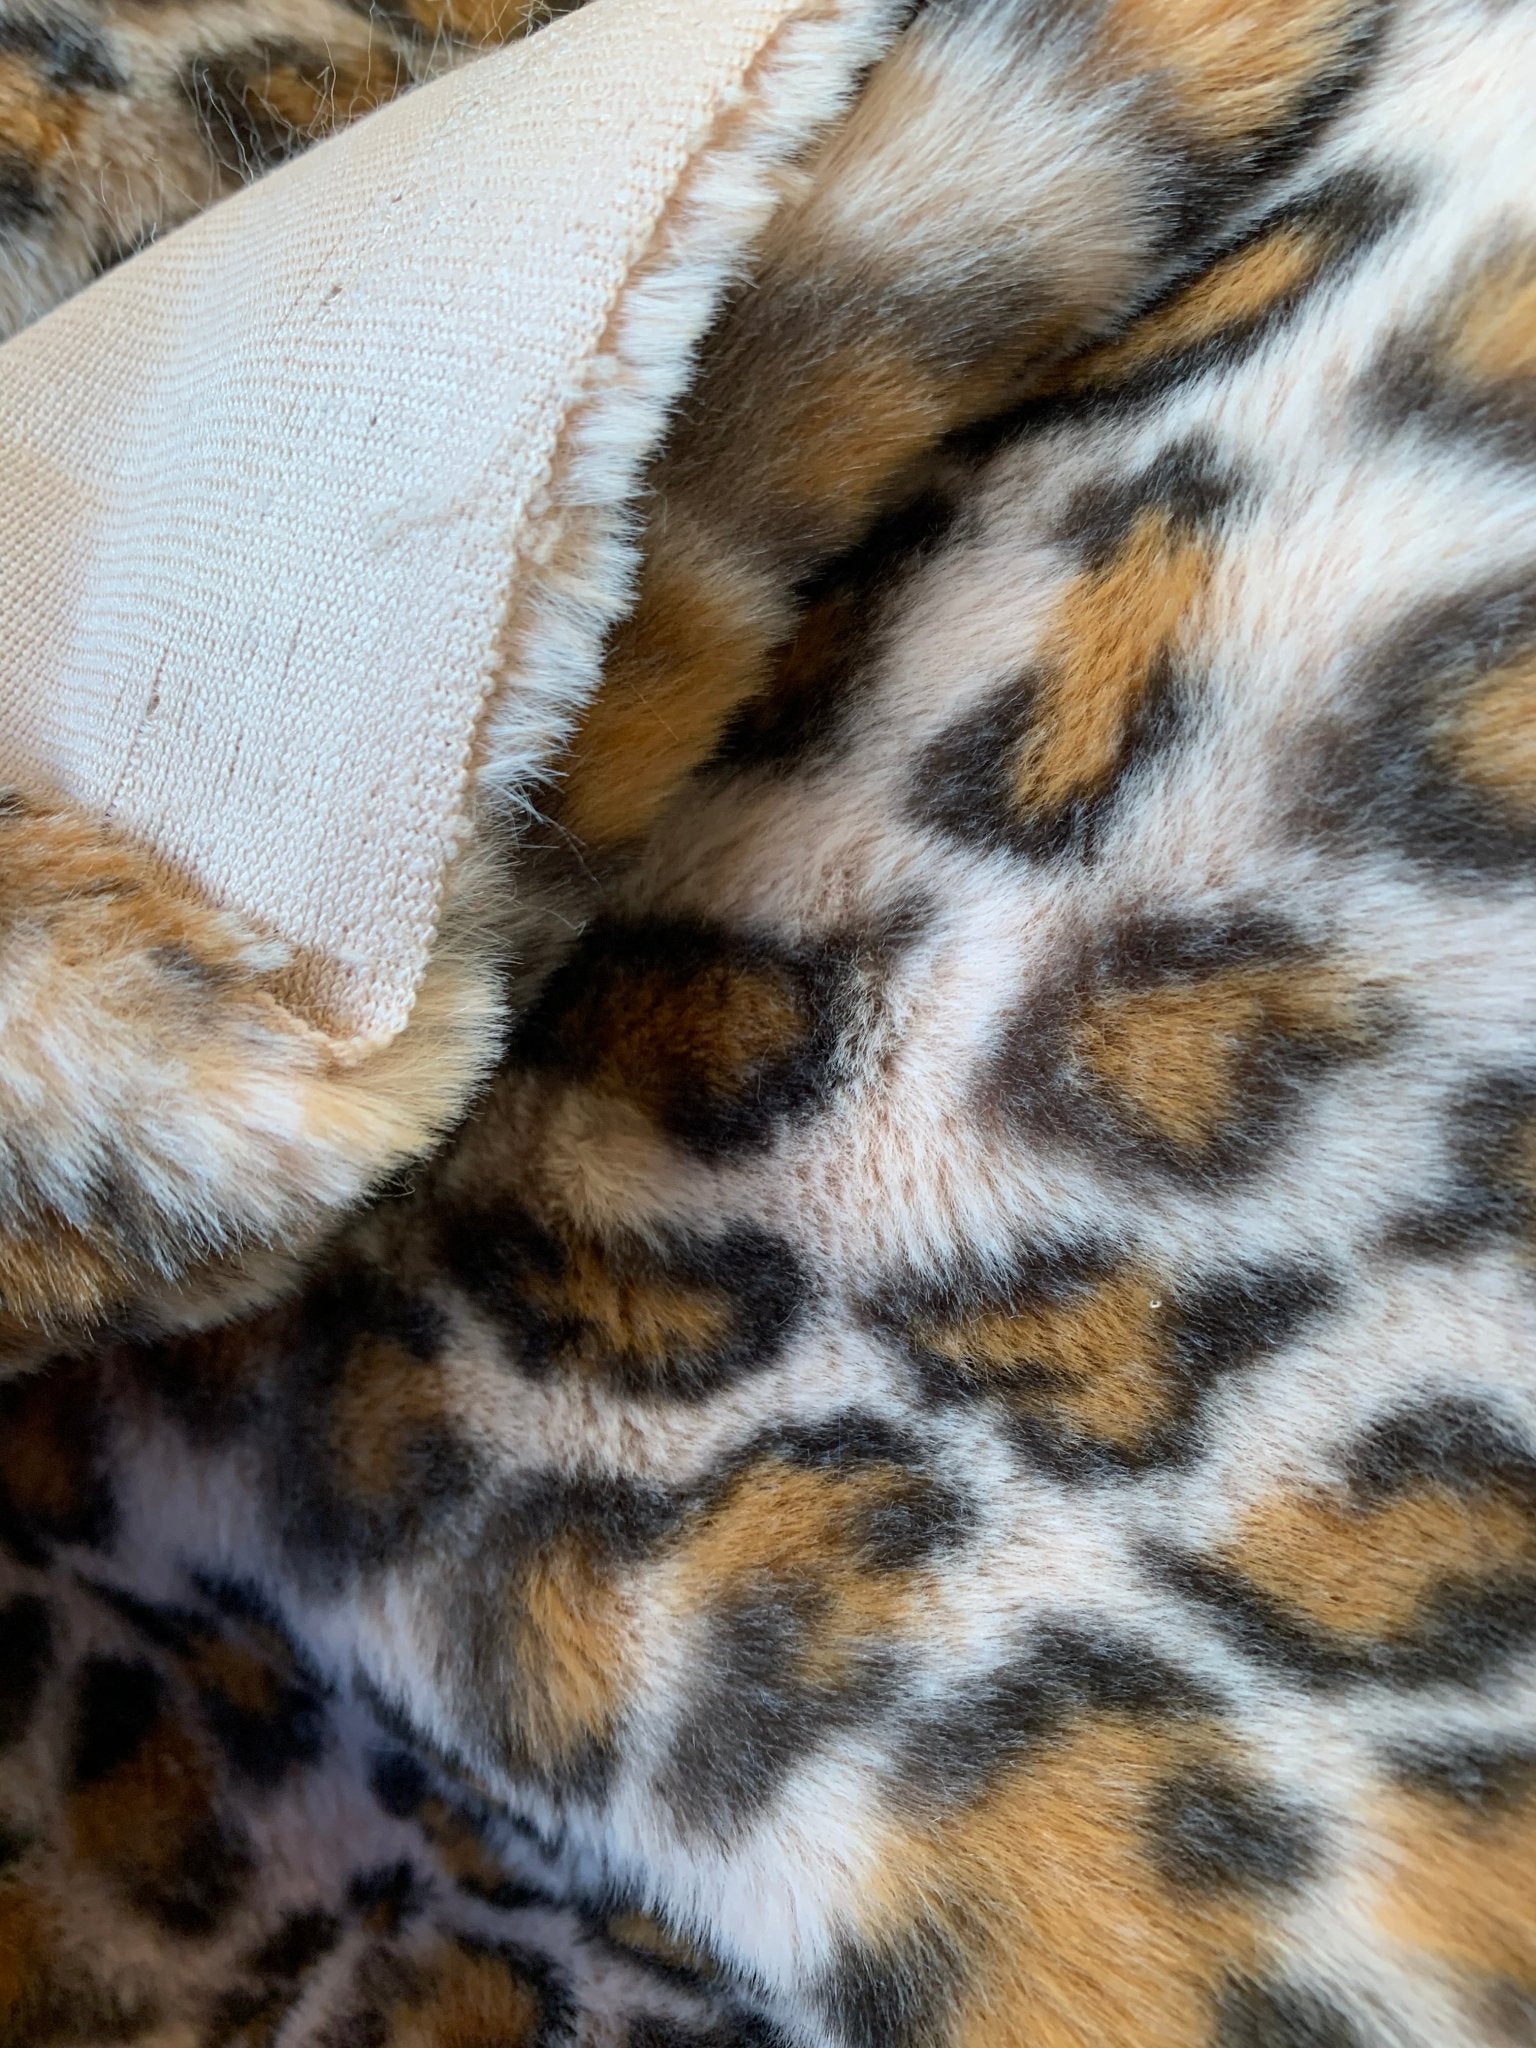 Leopard Fake Faux Fur Fabric By The Yard - Faux Fur Material Fashion FabricICEFABRICICE FABRICSBrownBy The Yard (60 inches Wide)Leopard Fake Faux Fur Fabric By The Yard - Faux Fur Material Fashion Fabric ICEFABRIC Brown